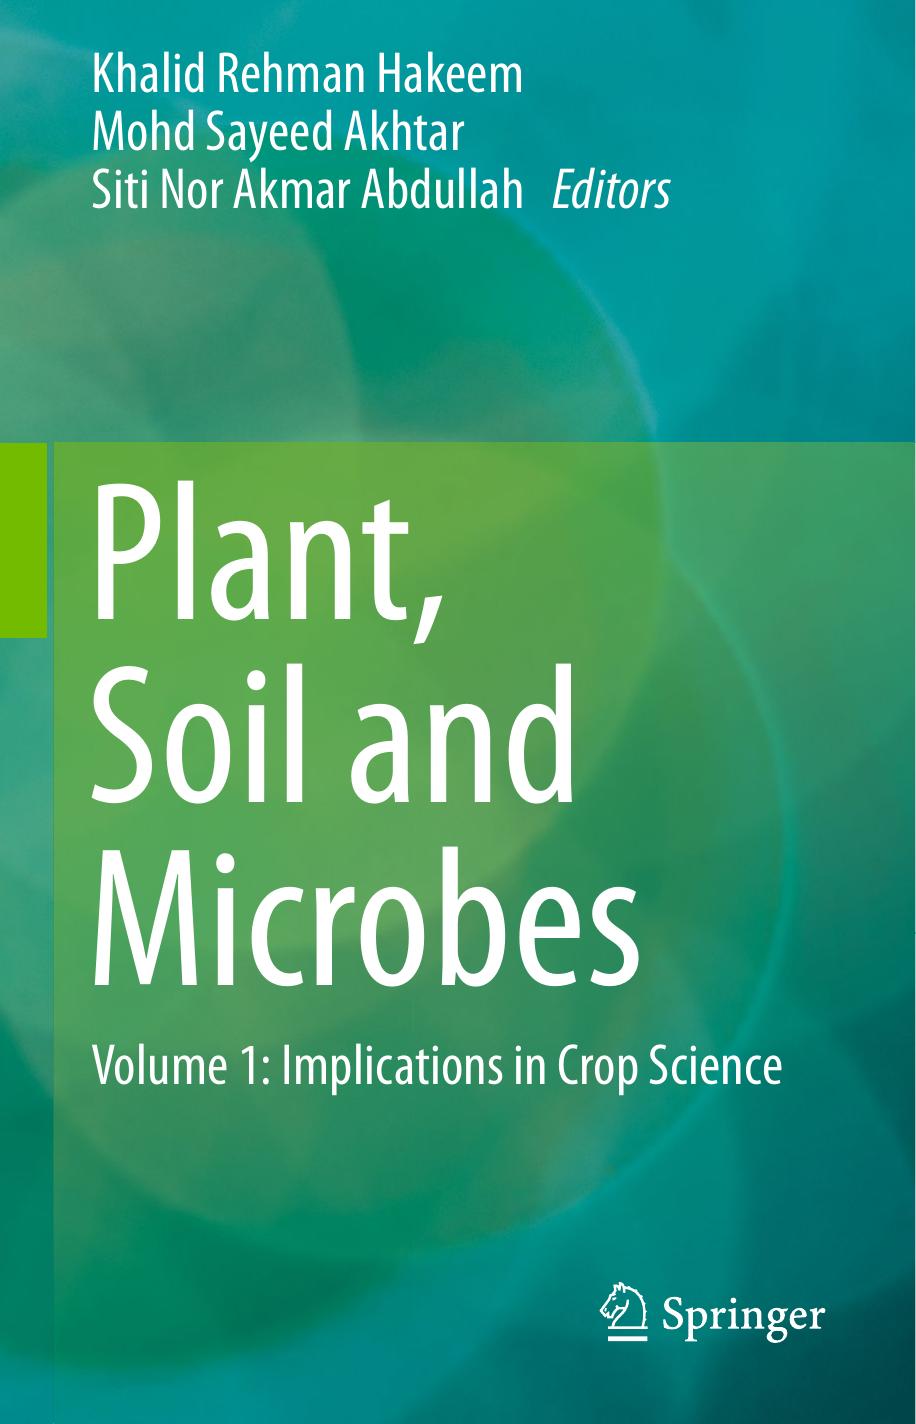 Plant, Soil and Microbes Volume 1 Implications in Crop Science 2016